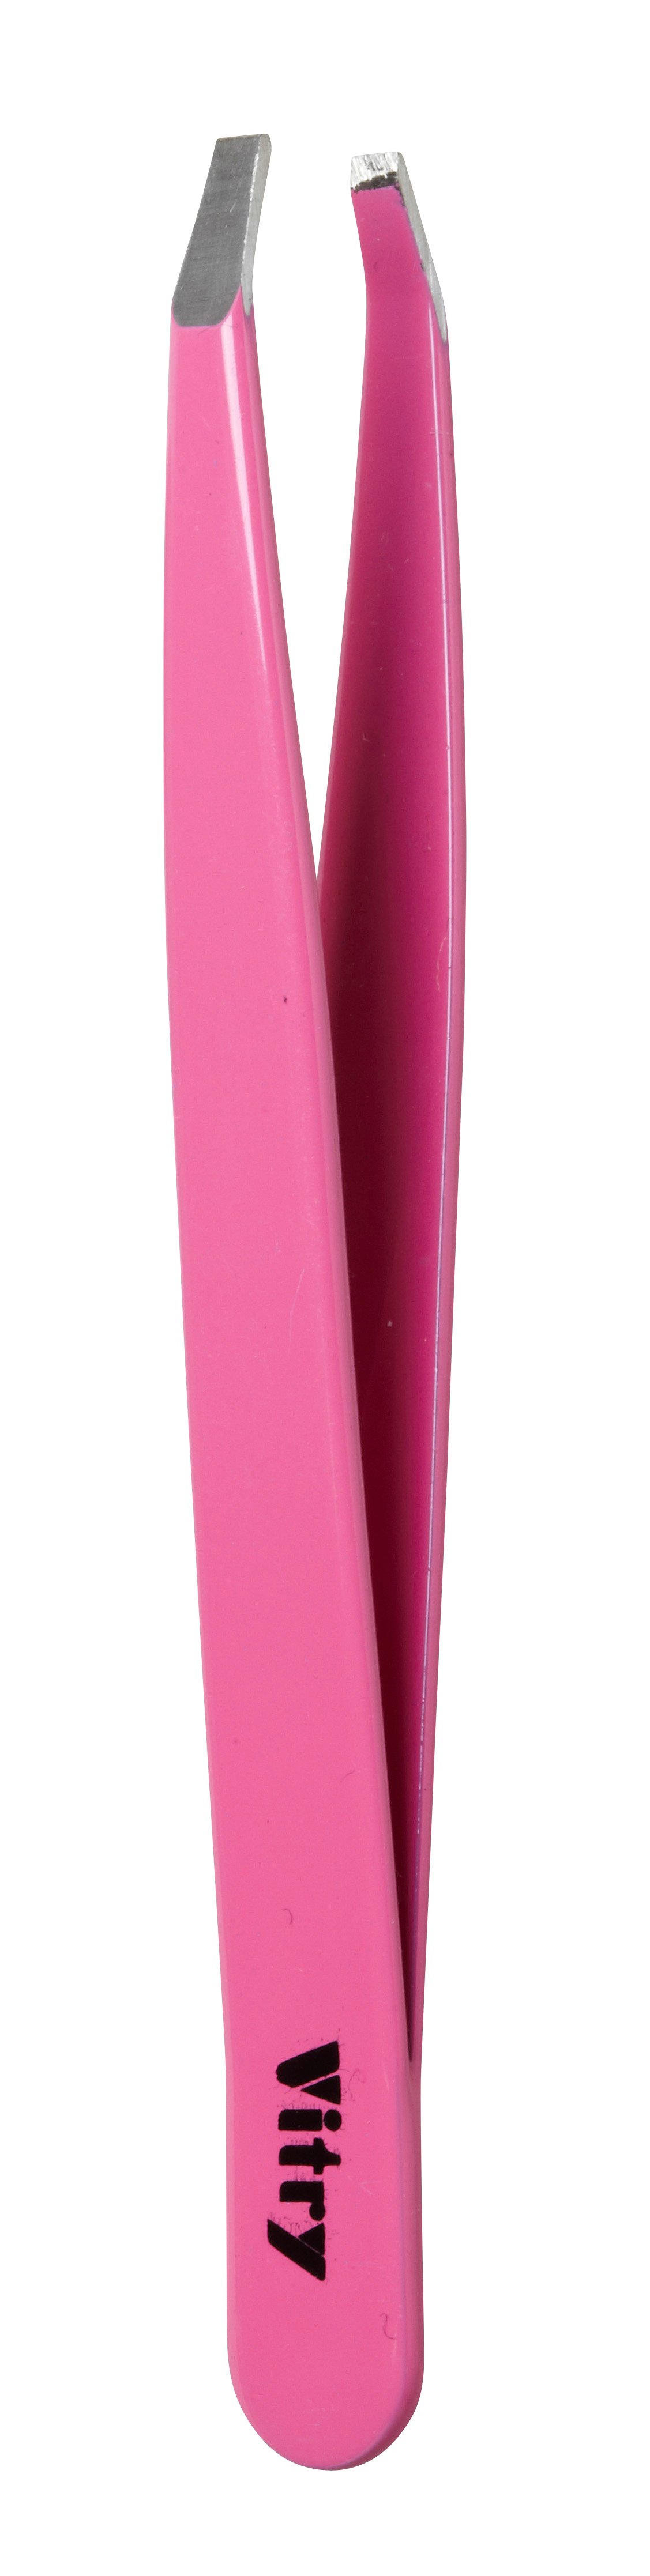 Vitry Professional Tweezer Crab Ends Stainless Steel Pink 1 st